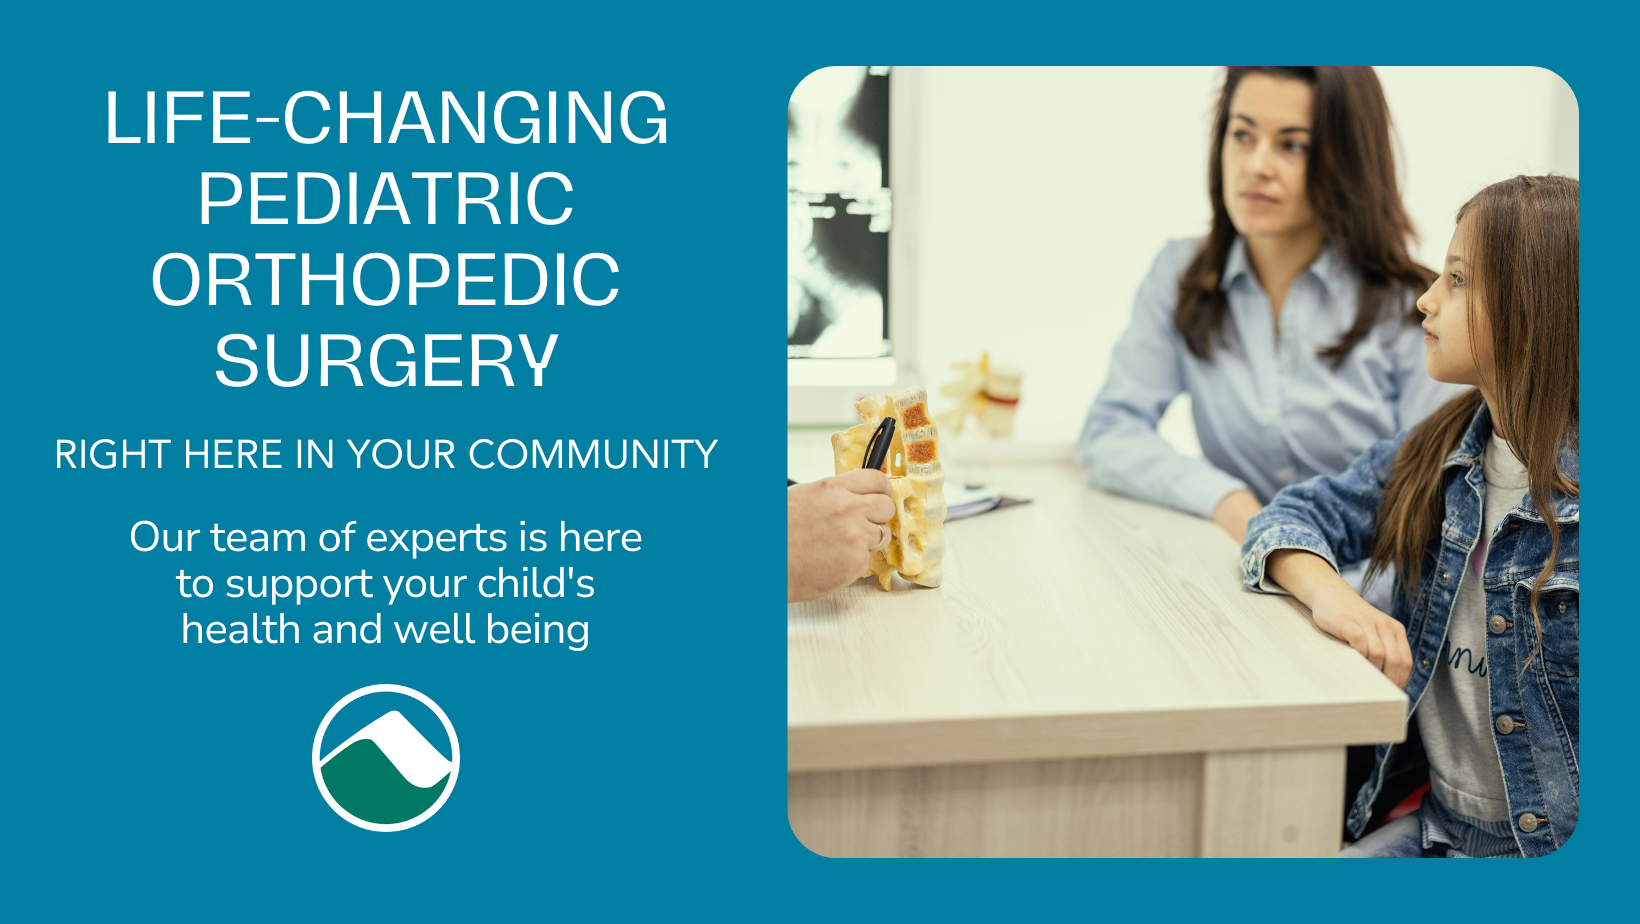 A promotional image with a teal background featuring the text: "Life-Changing Pediatric Orthopedic Surgery Right Here in Your Community. Our team of experts is here to support your child's health and well-being." On the right, a mother and daughter are seated at a table with a healthcare professional, who is holding a model of a spine.